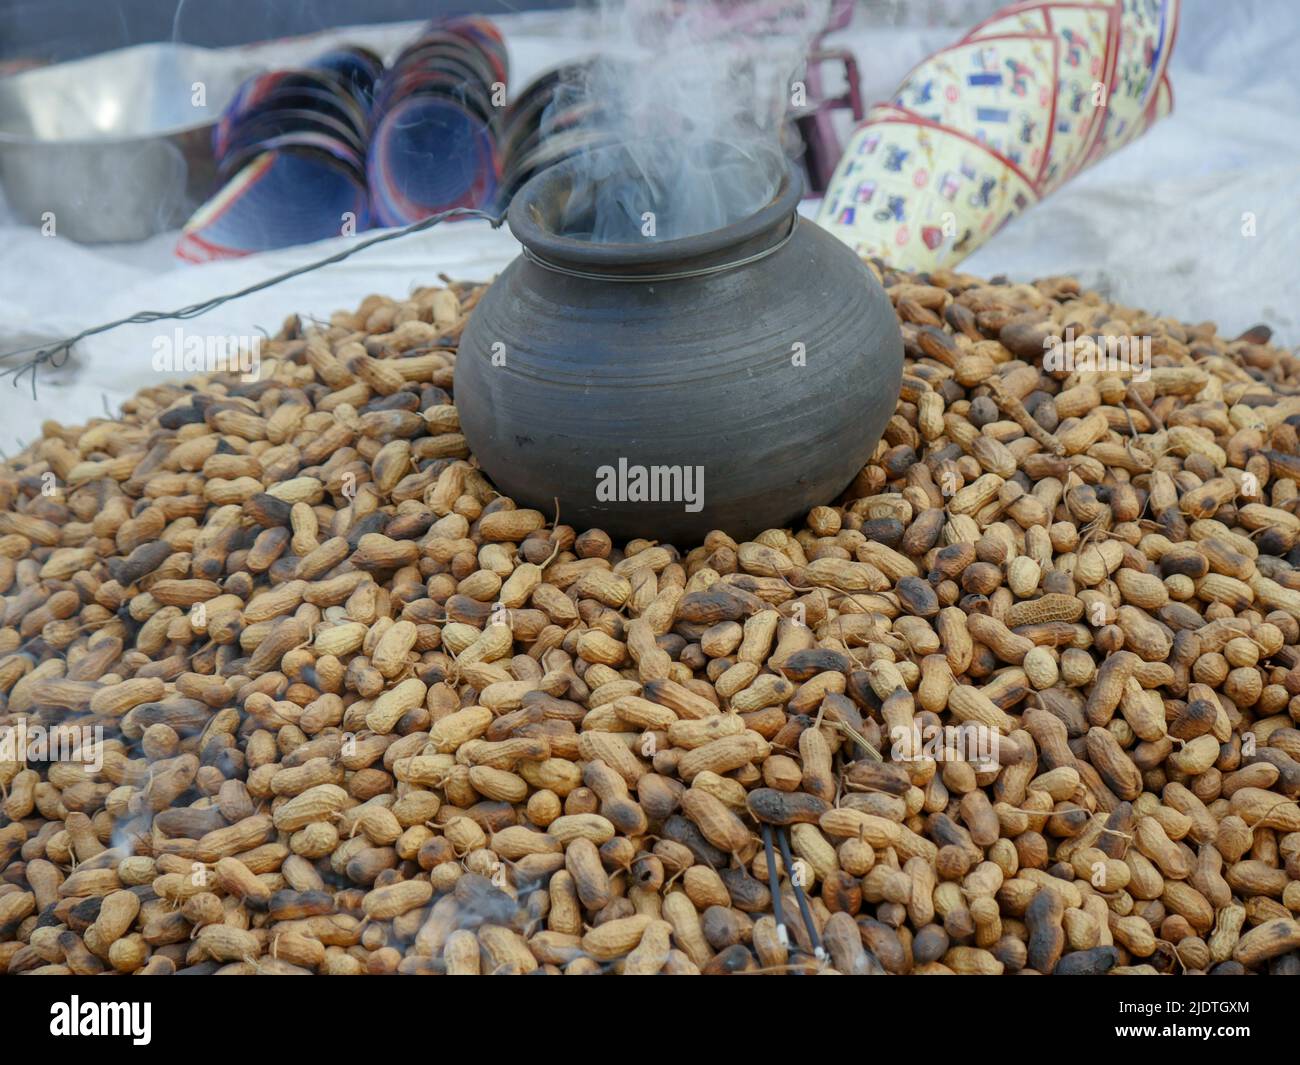 Heap of roasting raw peanuts, Smoke coming out of pot with peanuts below. peanut also known as the groundnut, goober, pindar or monkey nut. Stock Photo